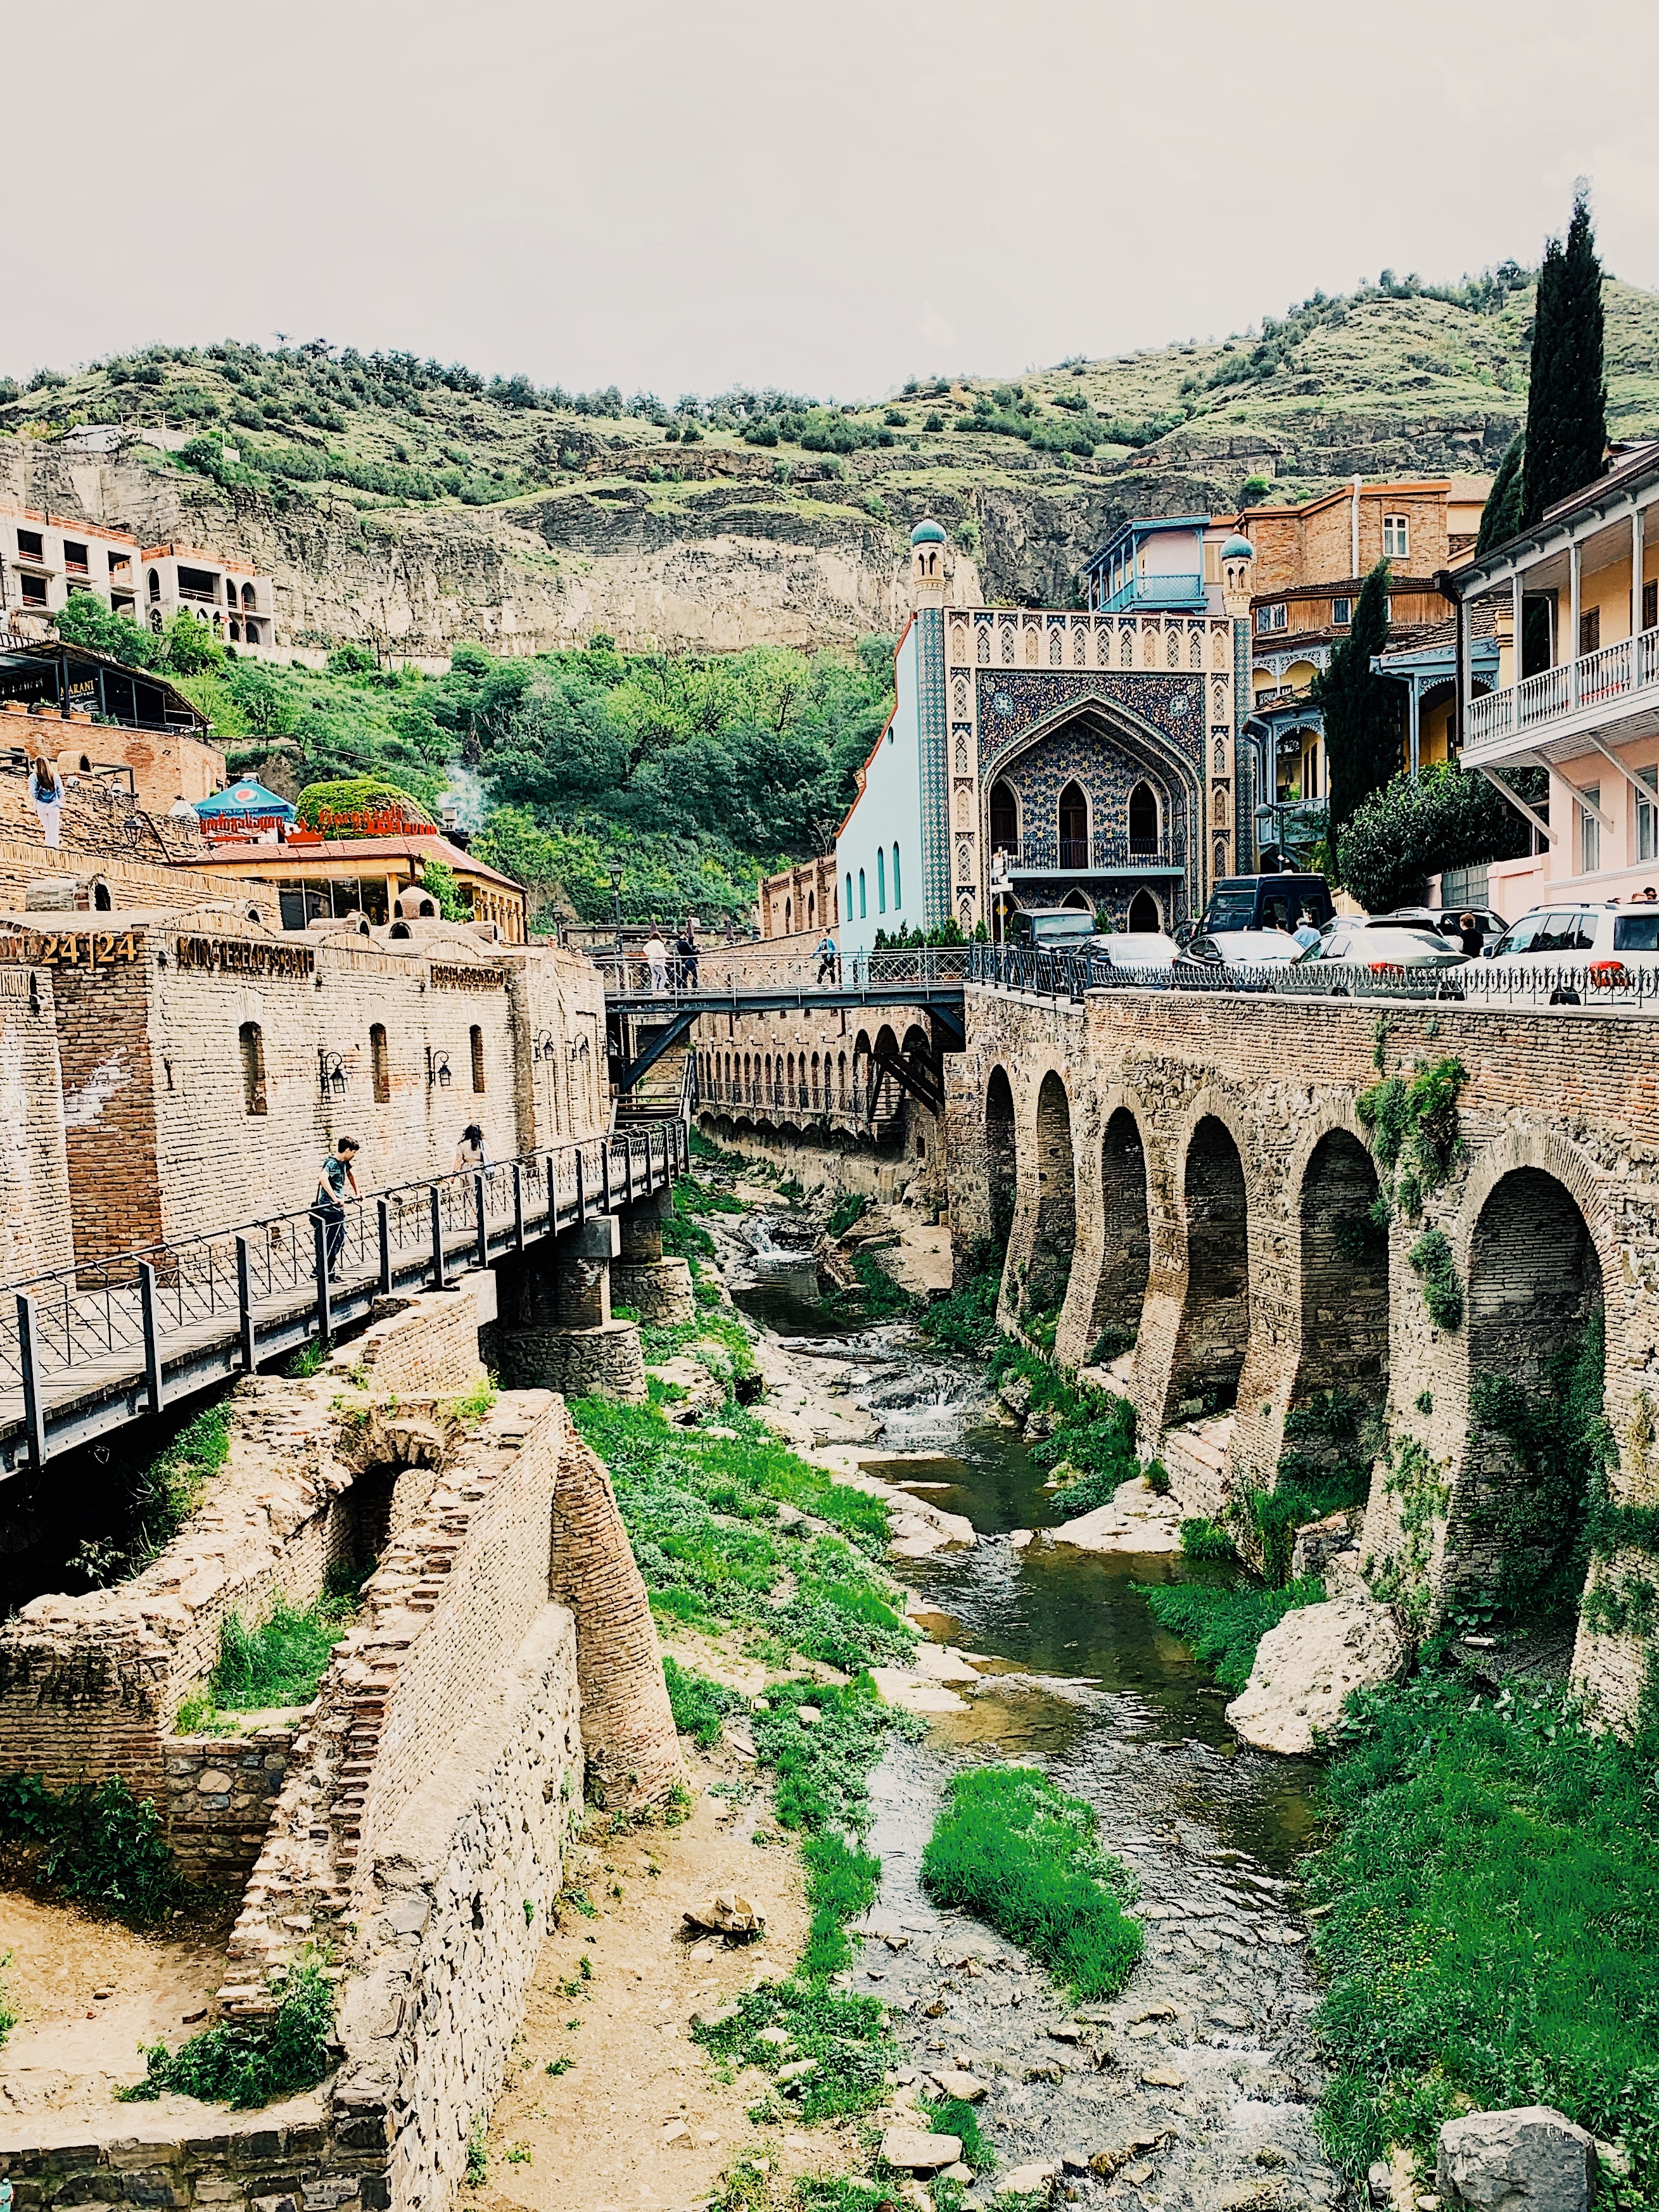 View of Tbilisi's bath district